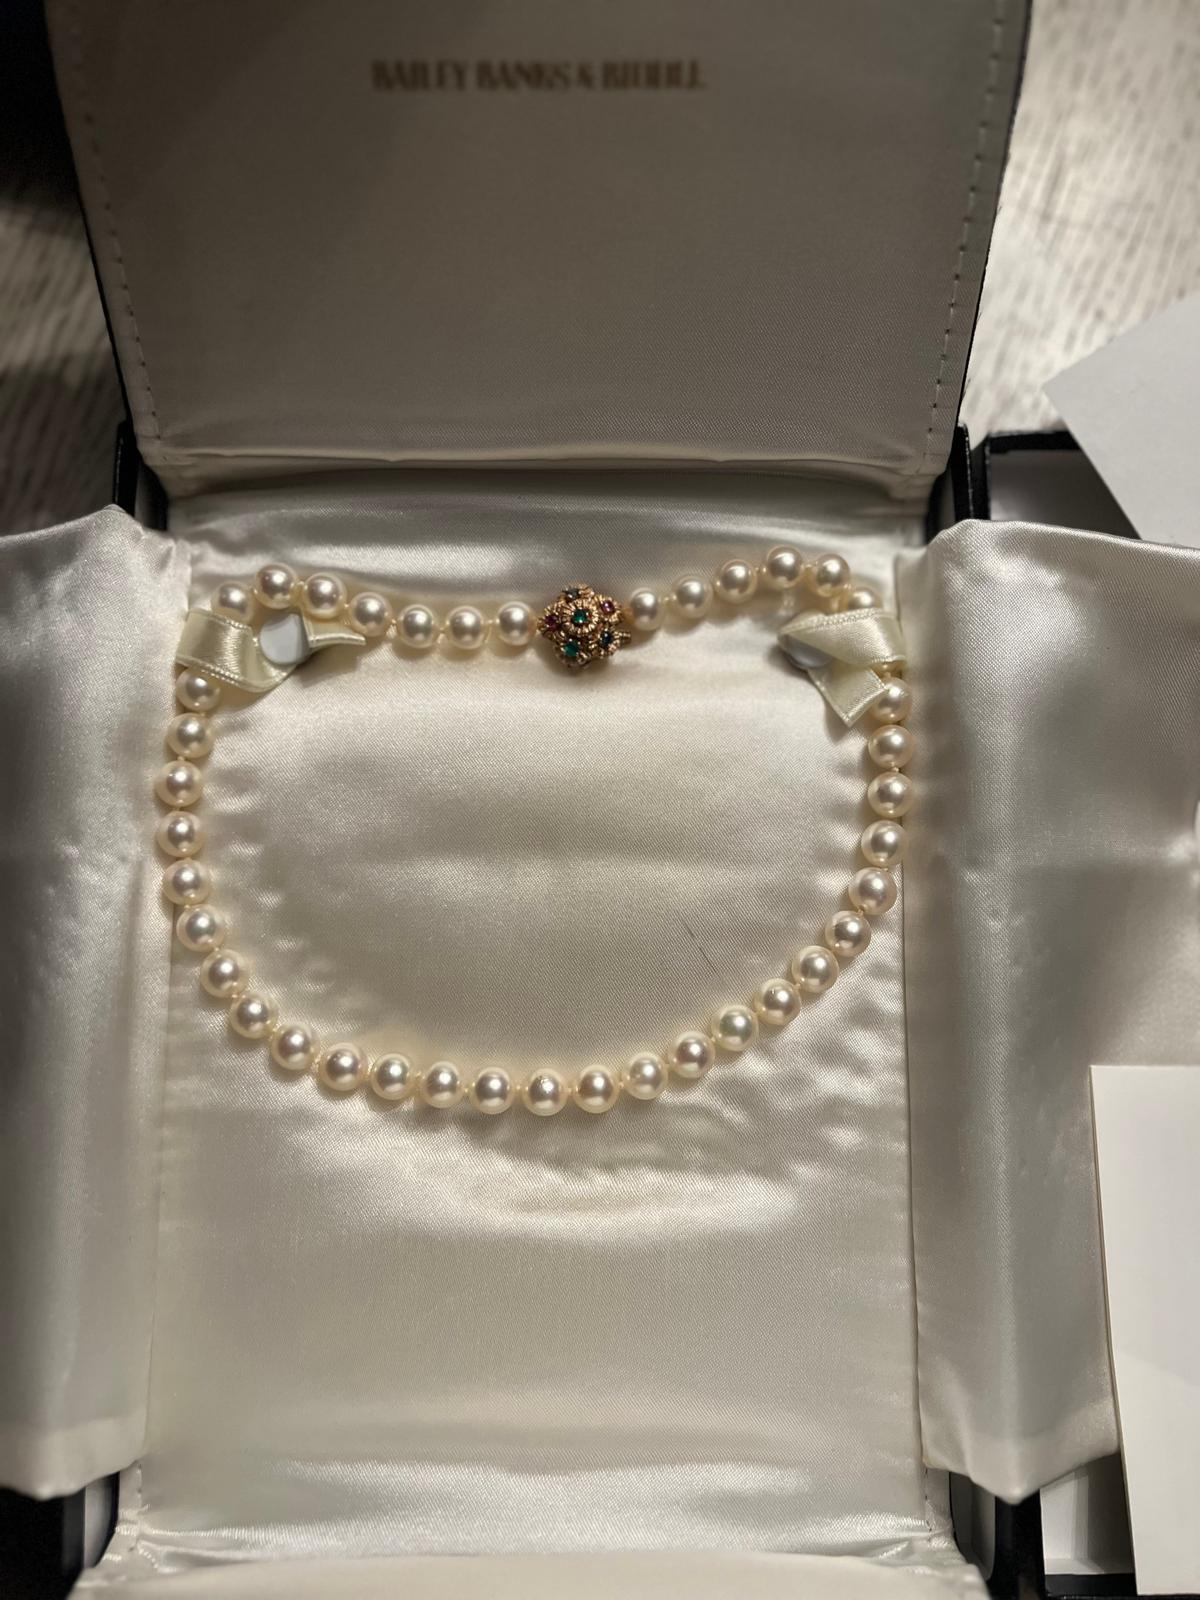 Bailey Banks and Biddle 16” Cultured Pearls.